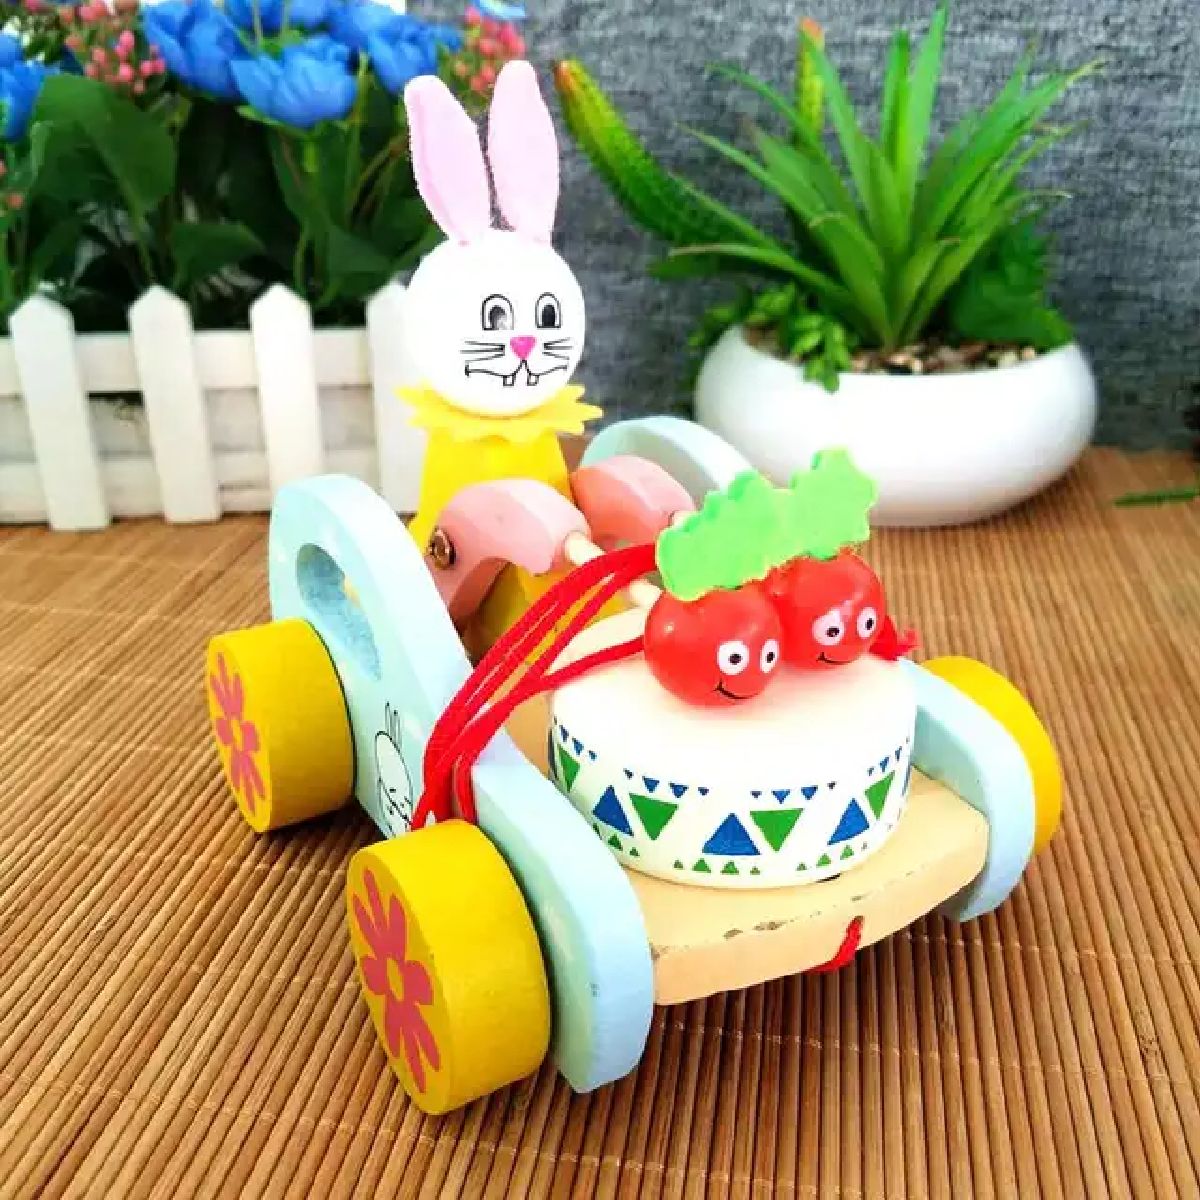 Wooden Pull Along Car Toy For Kids Happiness  (Multicolor, Pack of: 1)